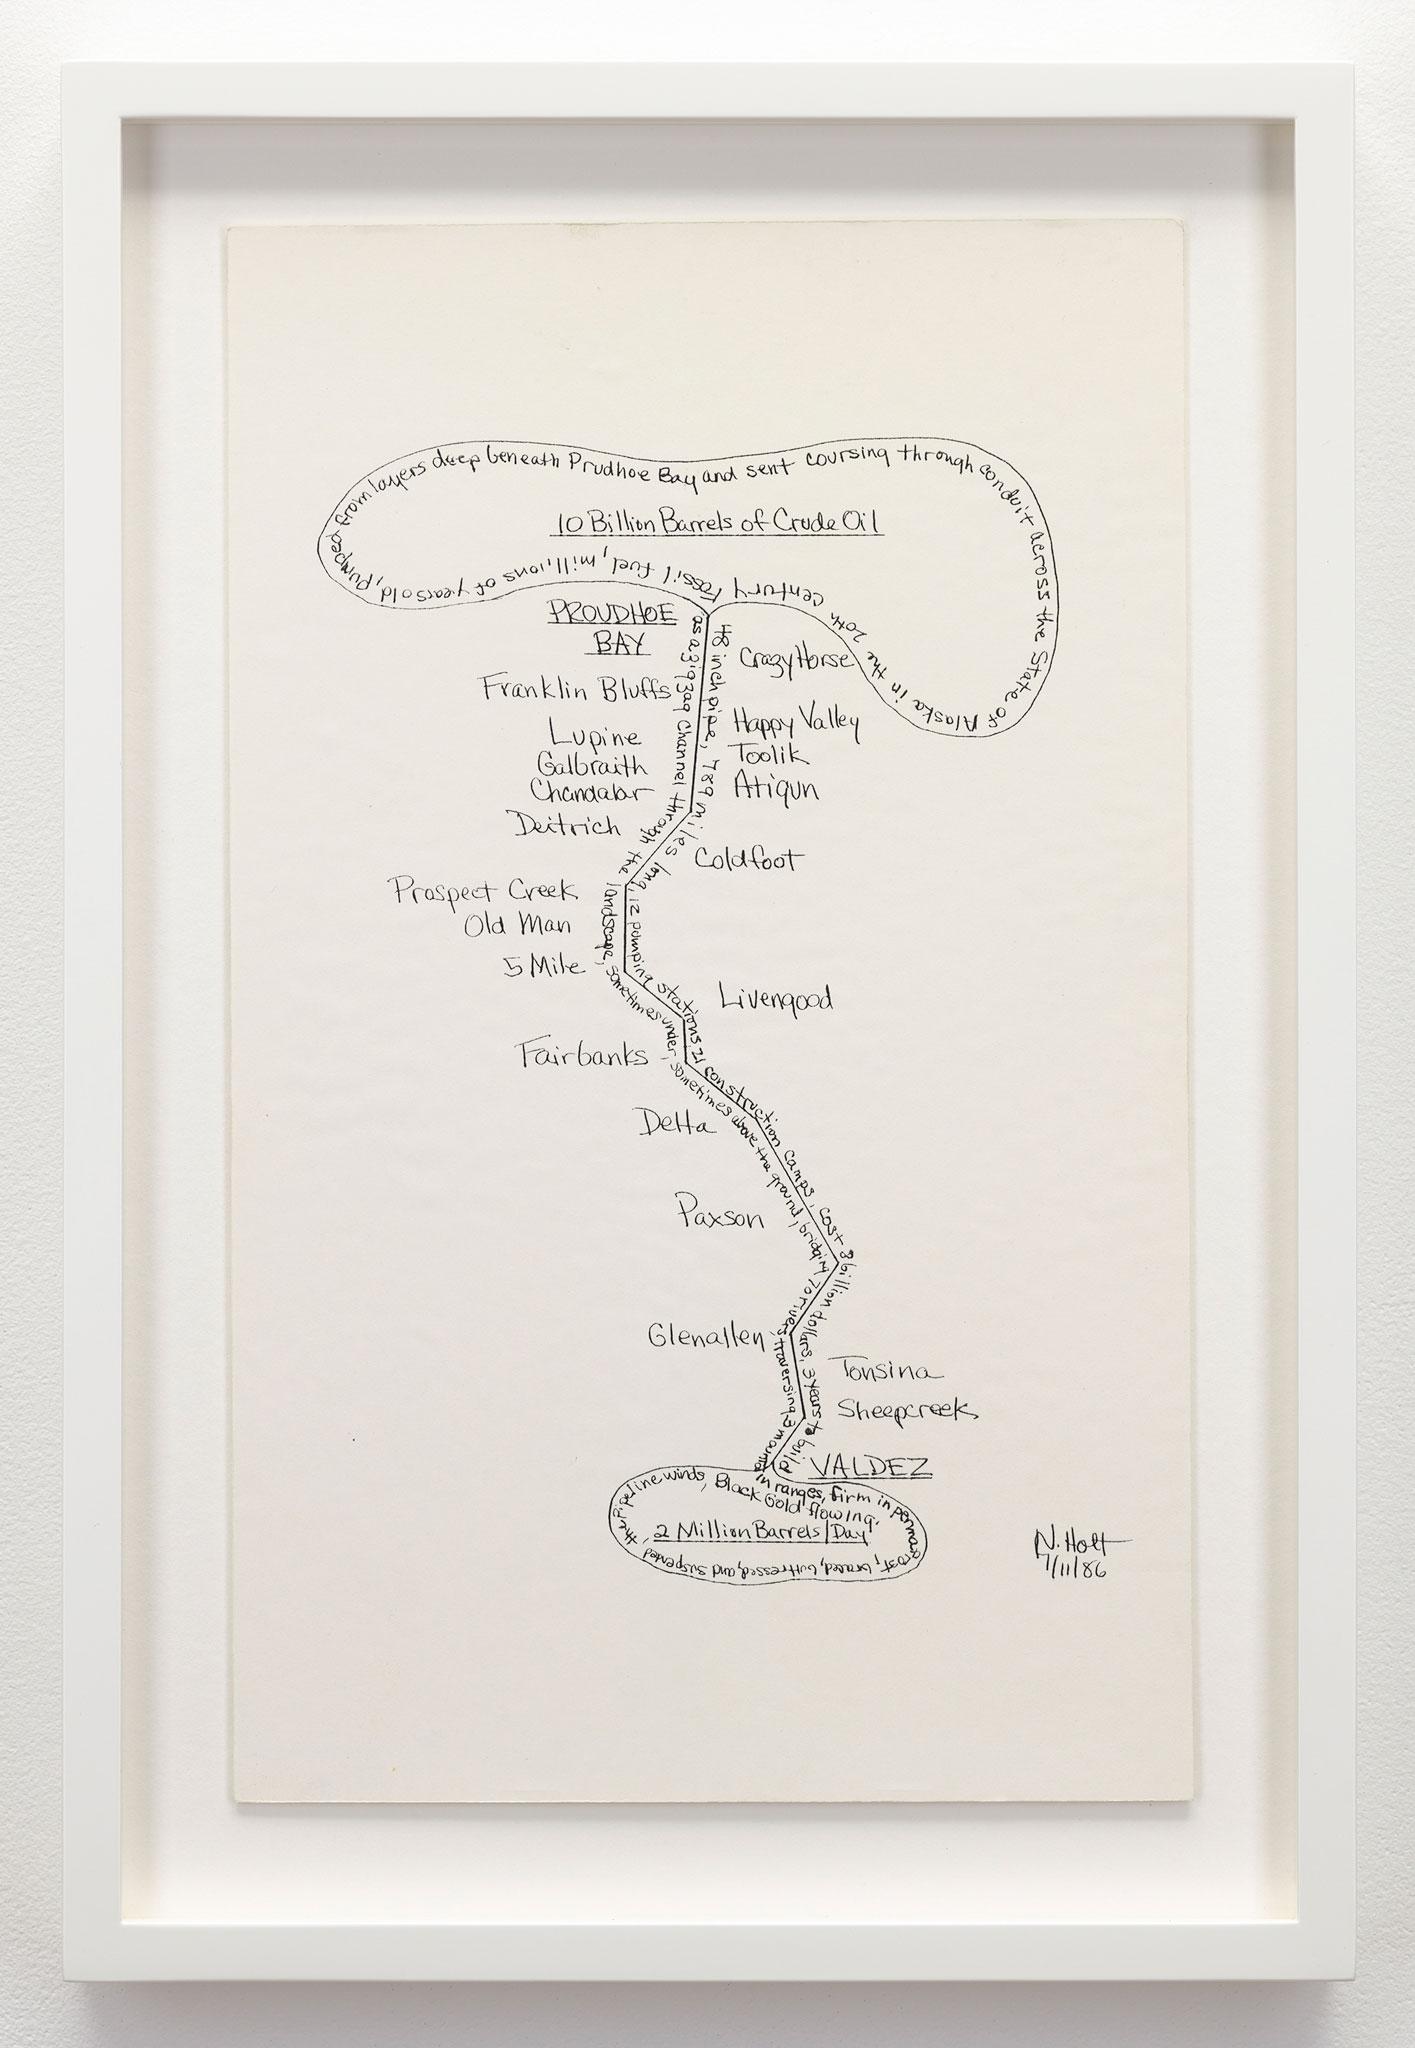 framed drawing on paper depicting the layout of an oil pipeline in Alaska with handwritten words along the path